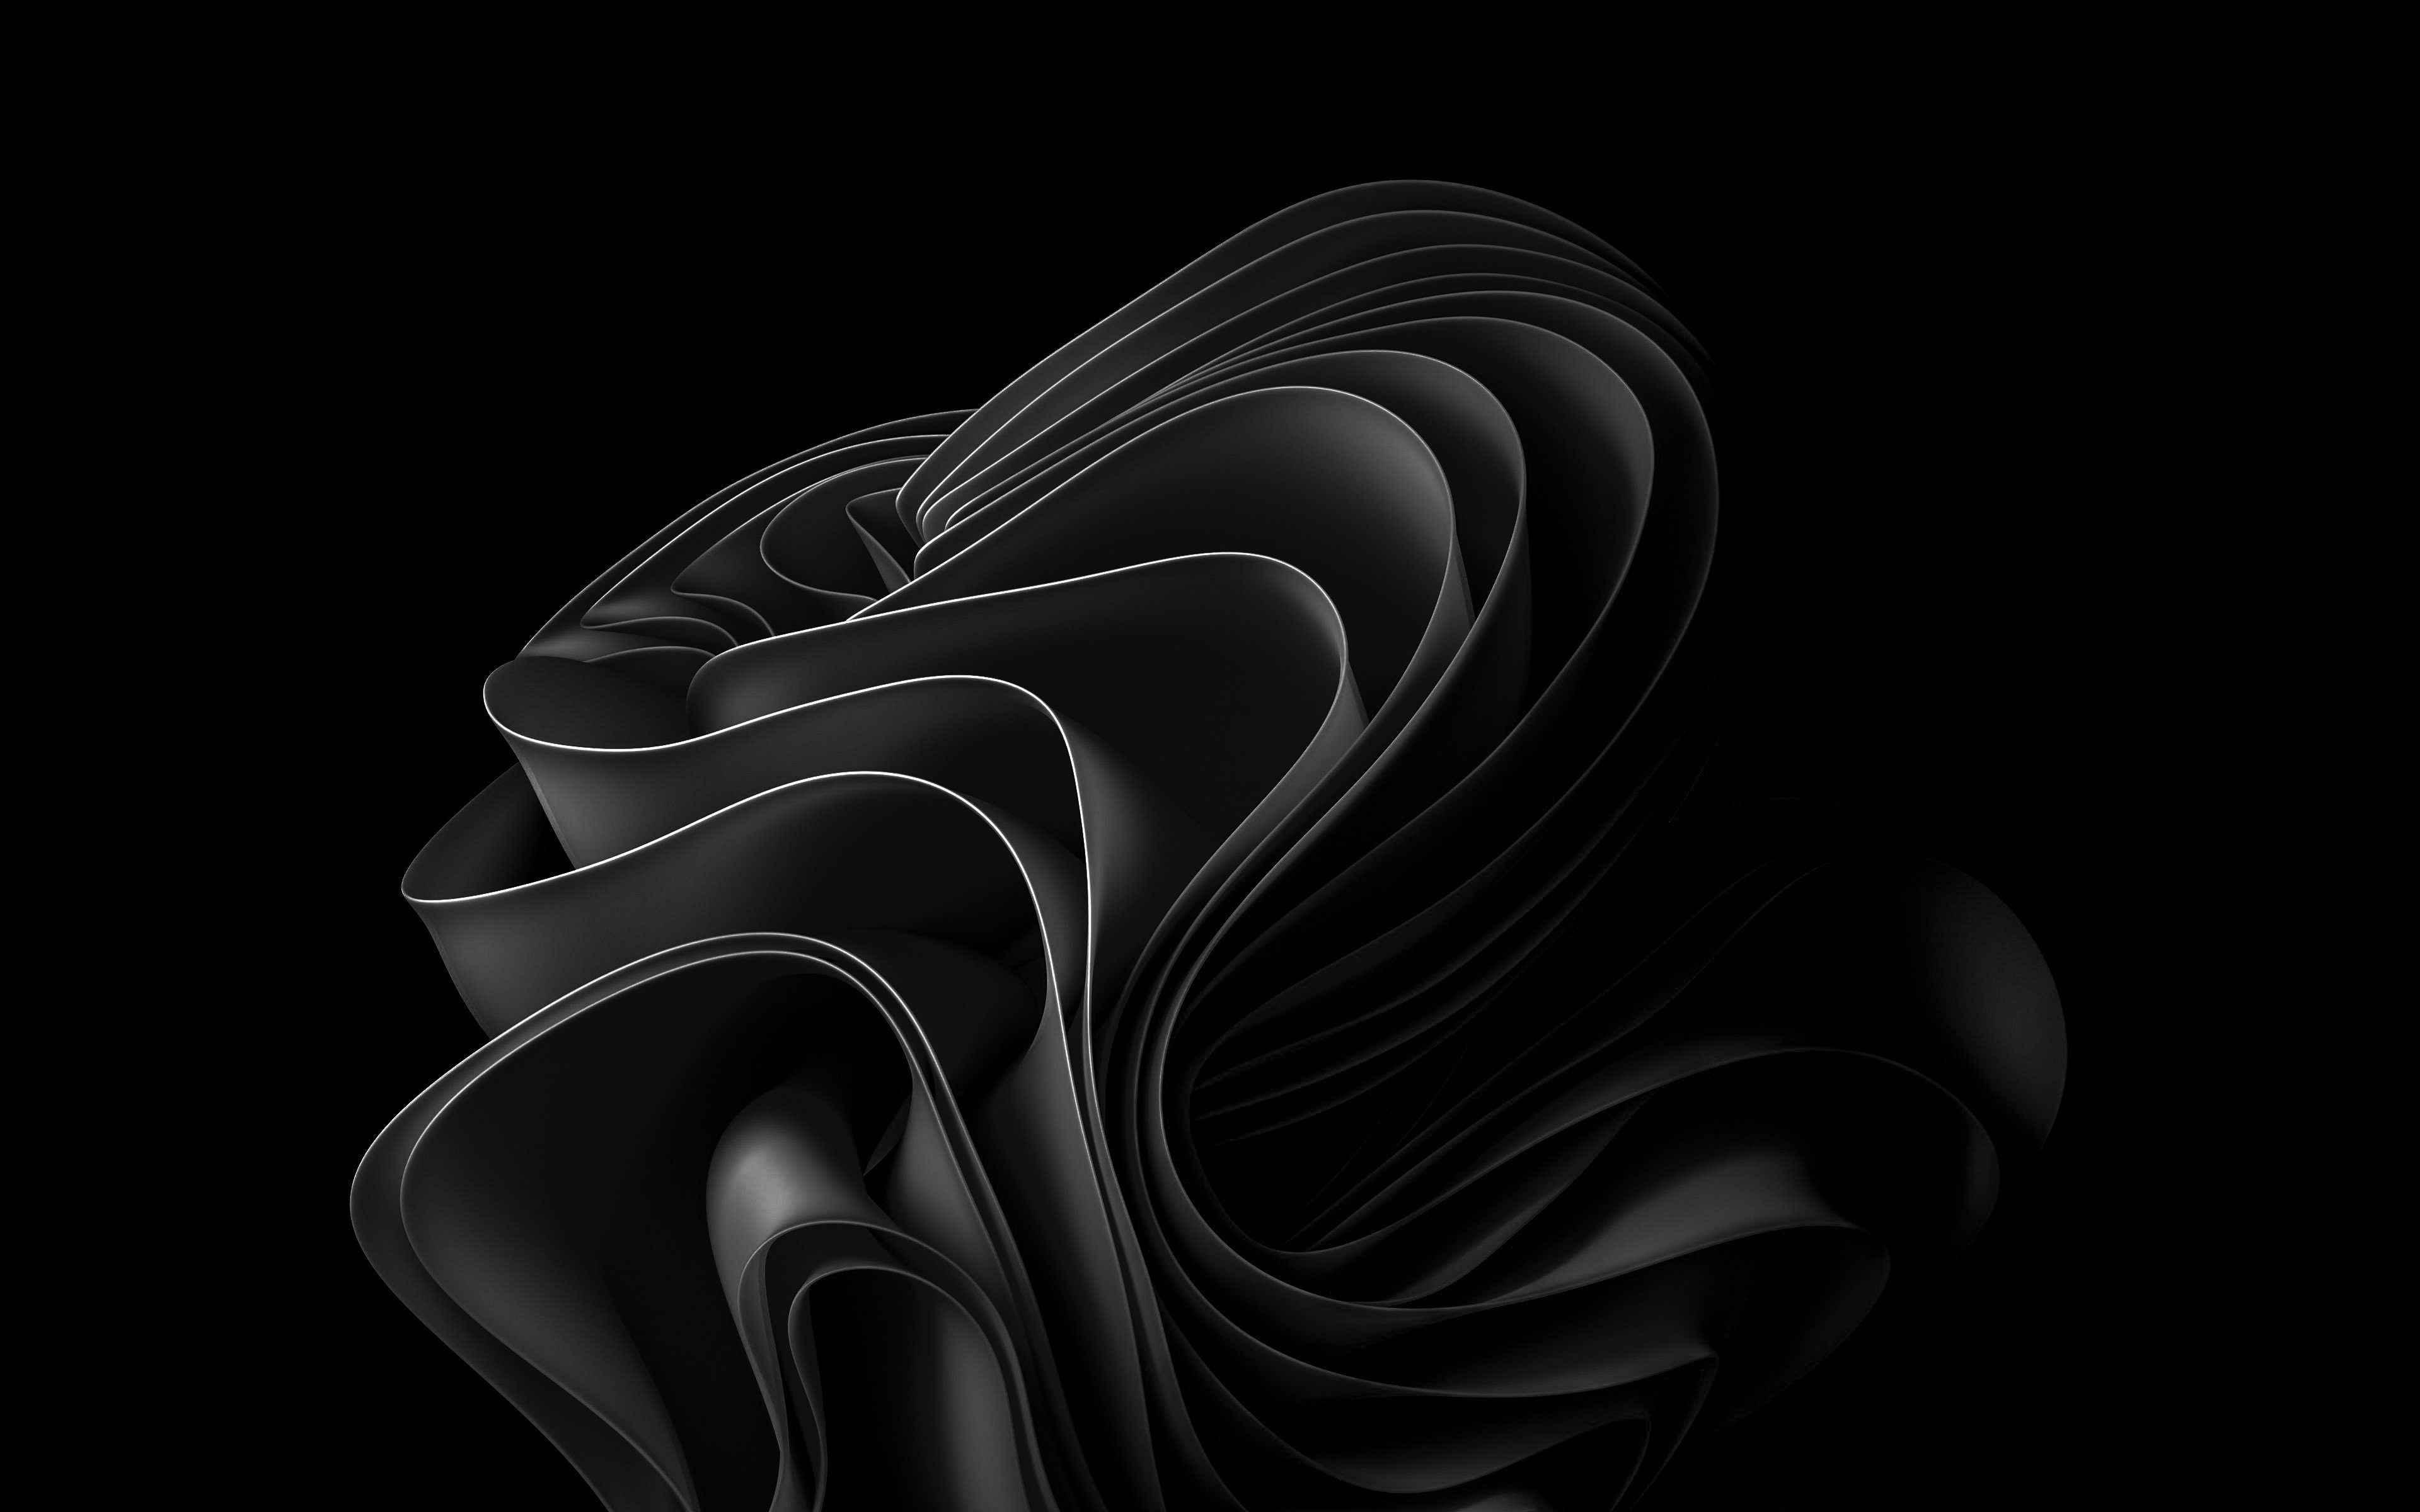 Download The Perfect Black: A Pure Black OLED Screen Wallpaper